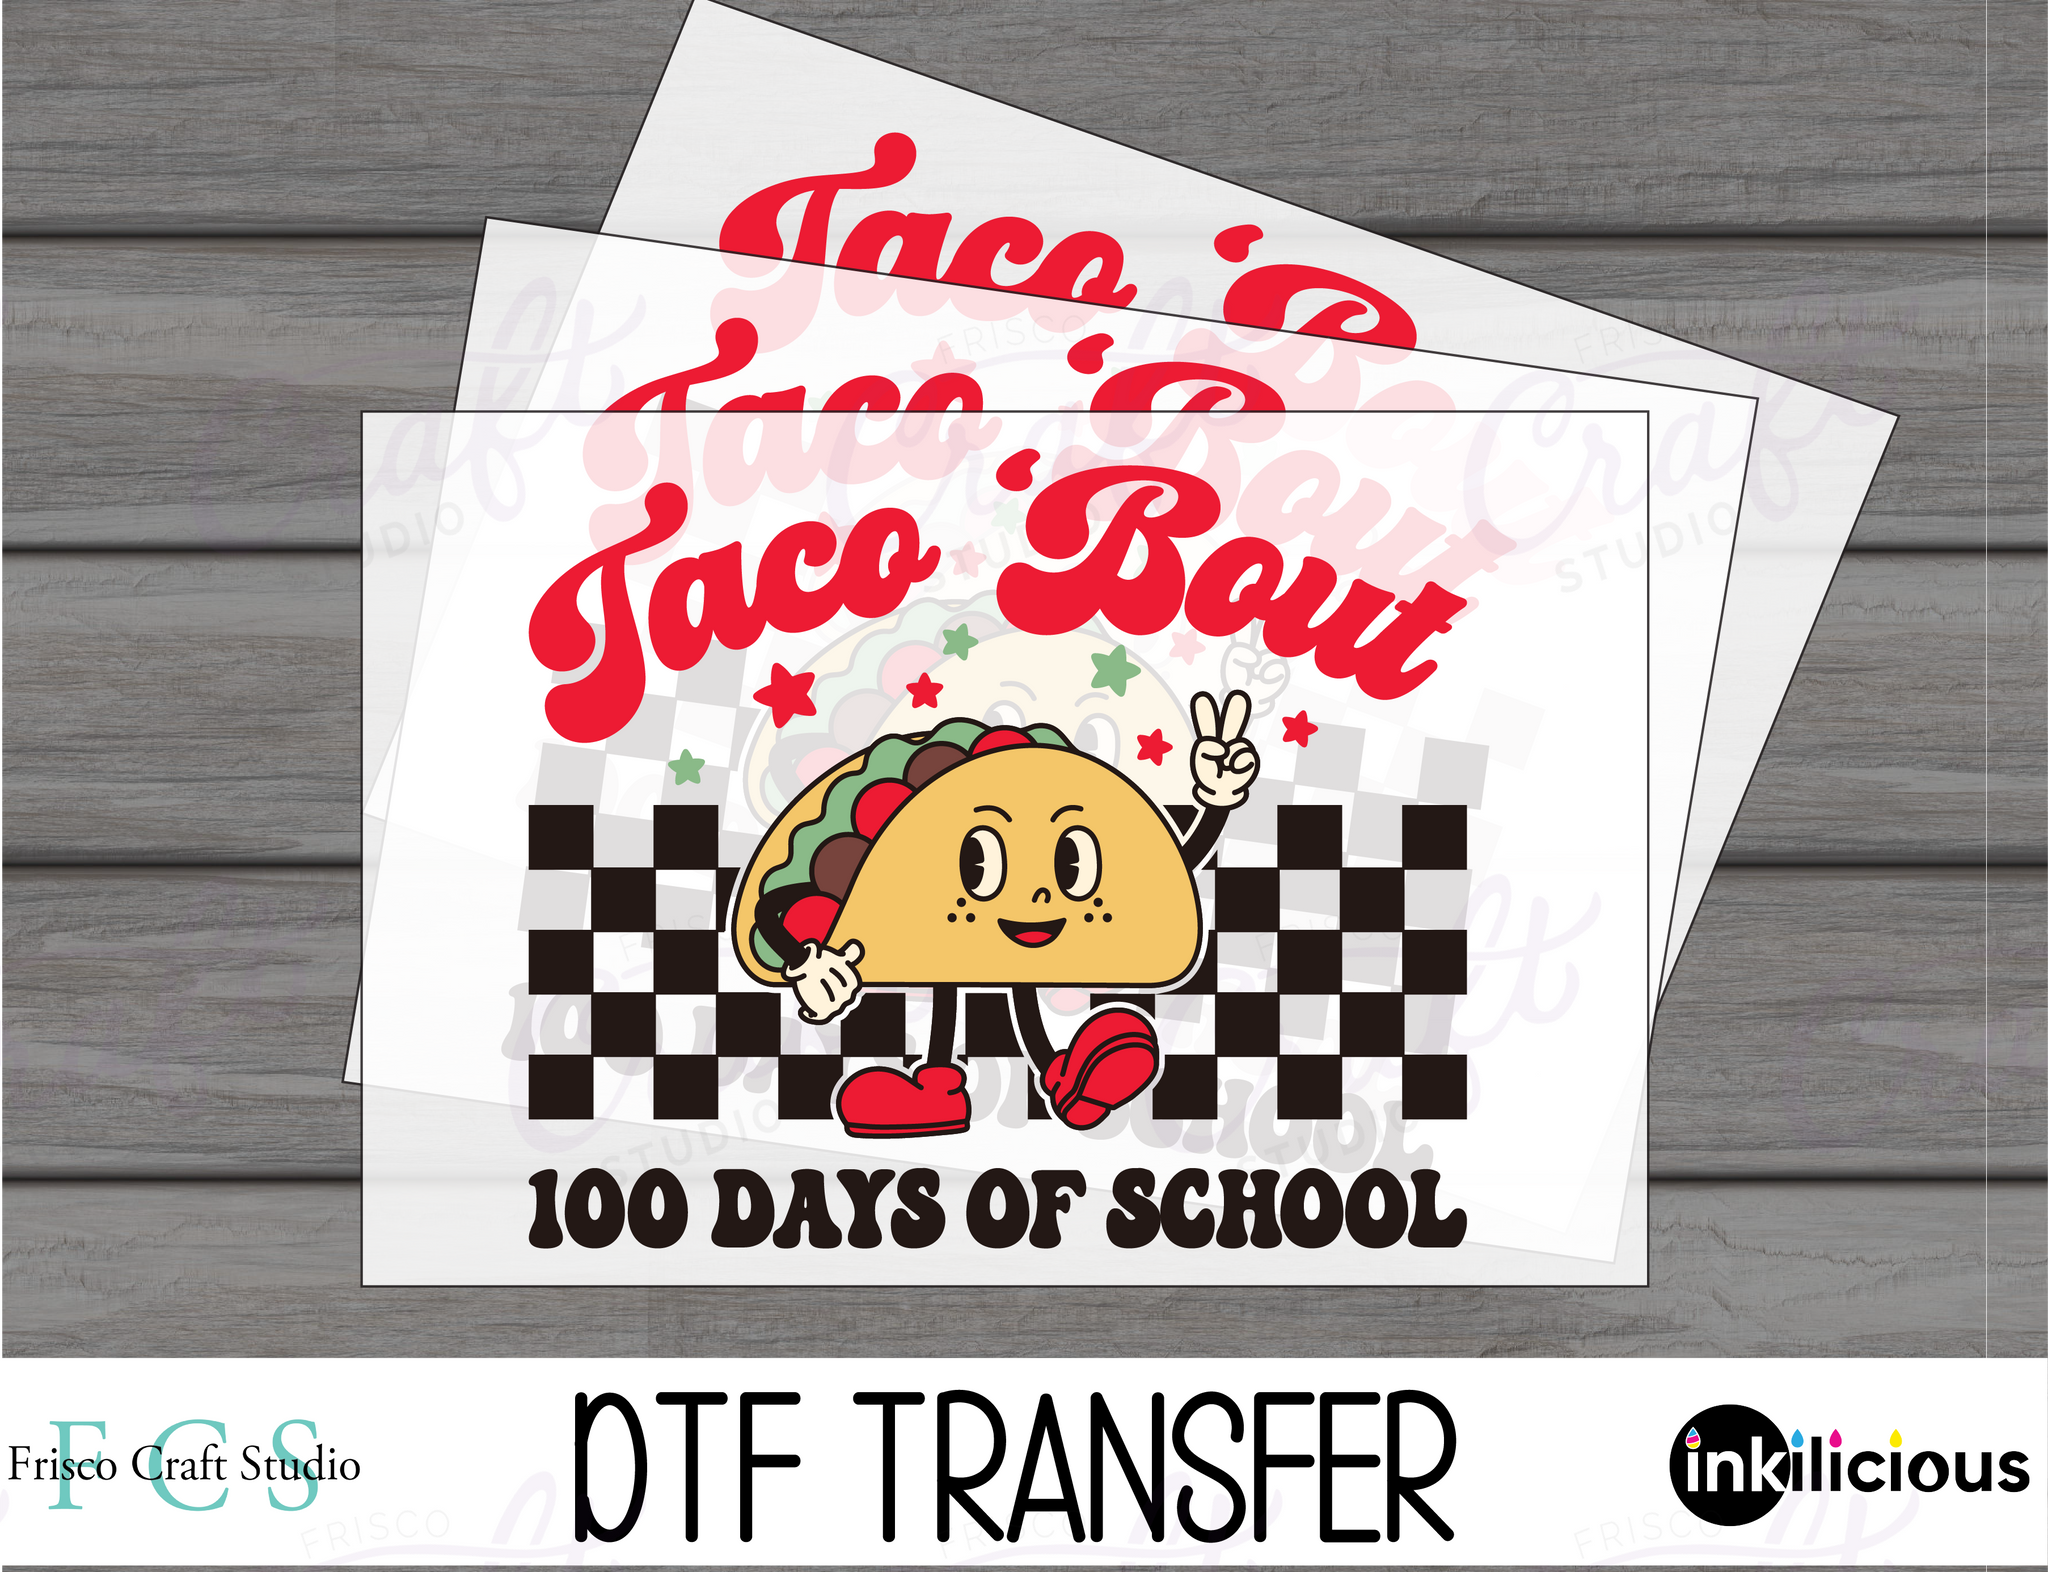 Taco "Bout 100 Days of School